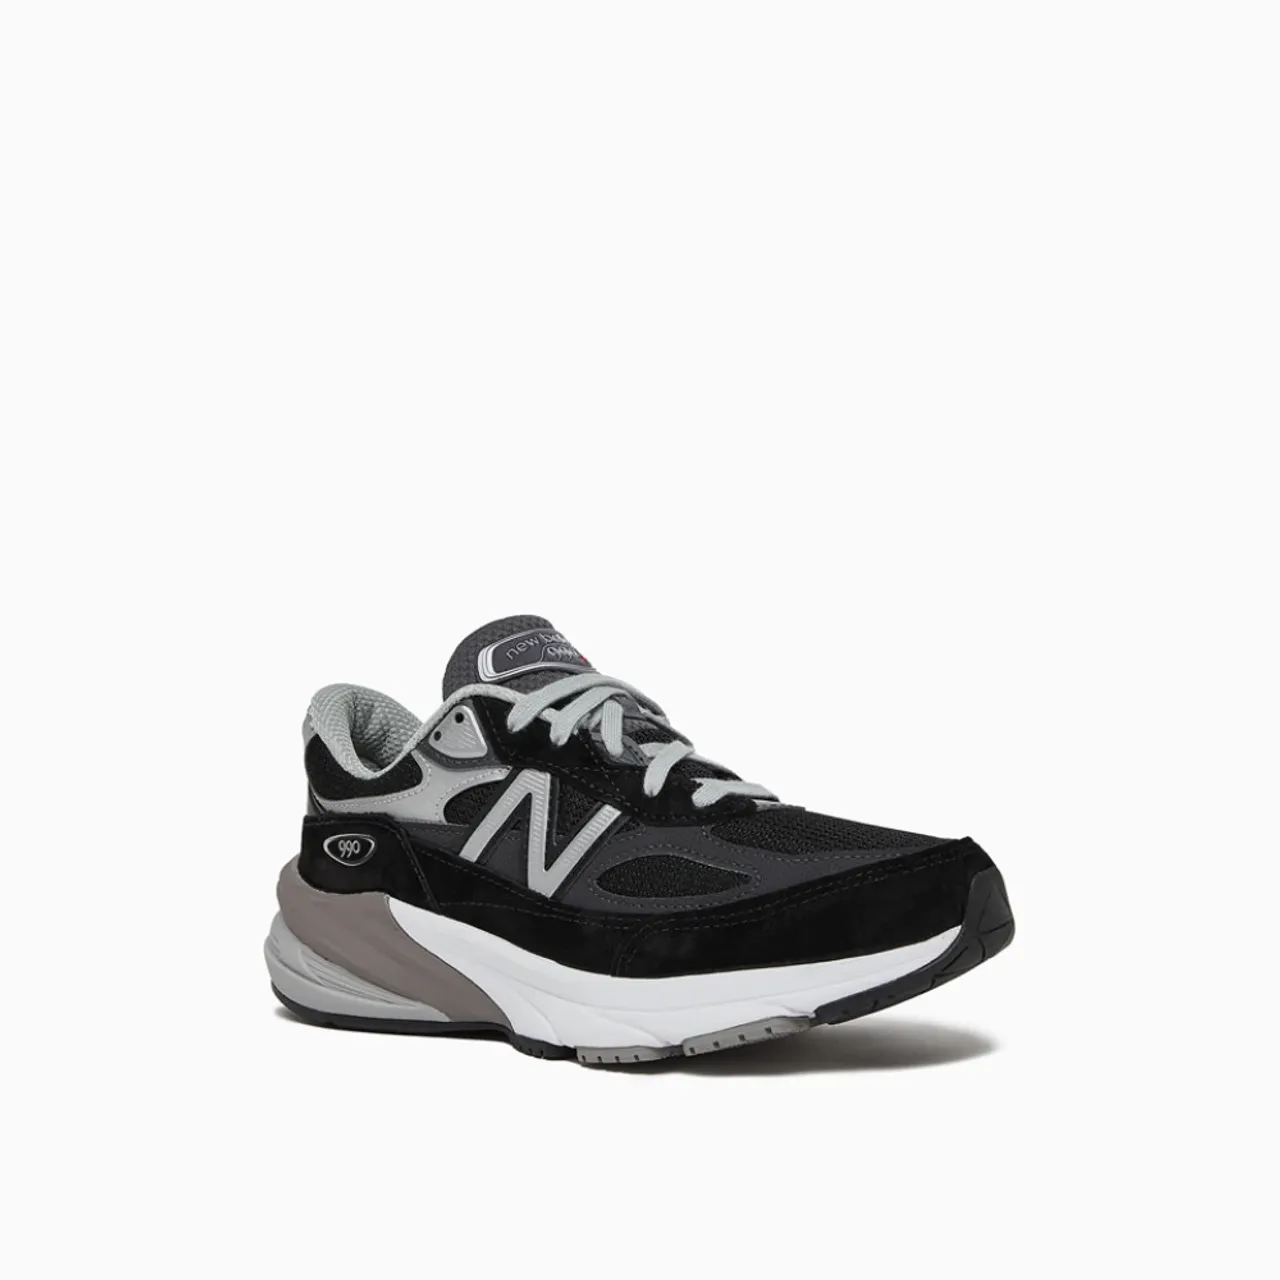 New Balance , USA Made Sneakers with Reflective Details ,Black male, Sizes: 11 UK, 7 UK, 10 UK, 9 UK, 7 1/2 UK, 12 UK, 6 1/2 UK, 9 1/2 UK, 8 1/2 UK, 1